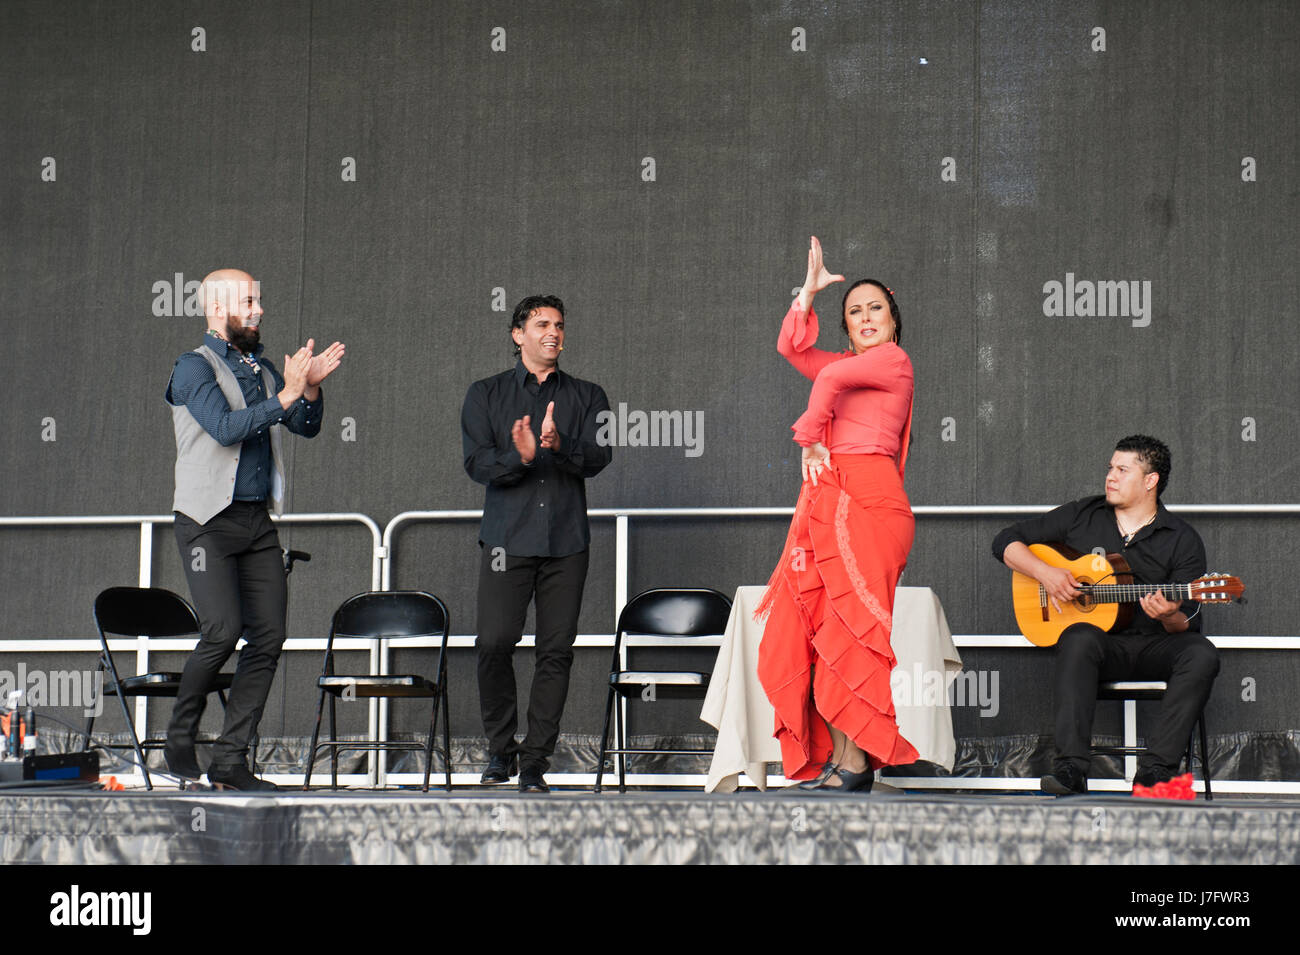 Sonia Olla, flamenco dancer, and Ismael Fernández, singer, performing in Battery Park City with dancer, Nino de los Reyes, for a Flamenco Family Dance Stock Photo